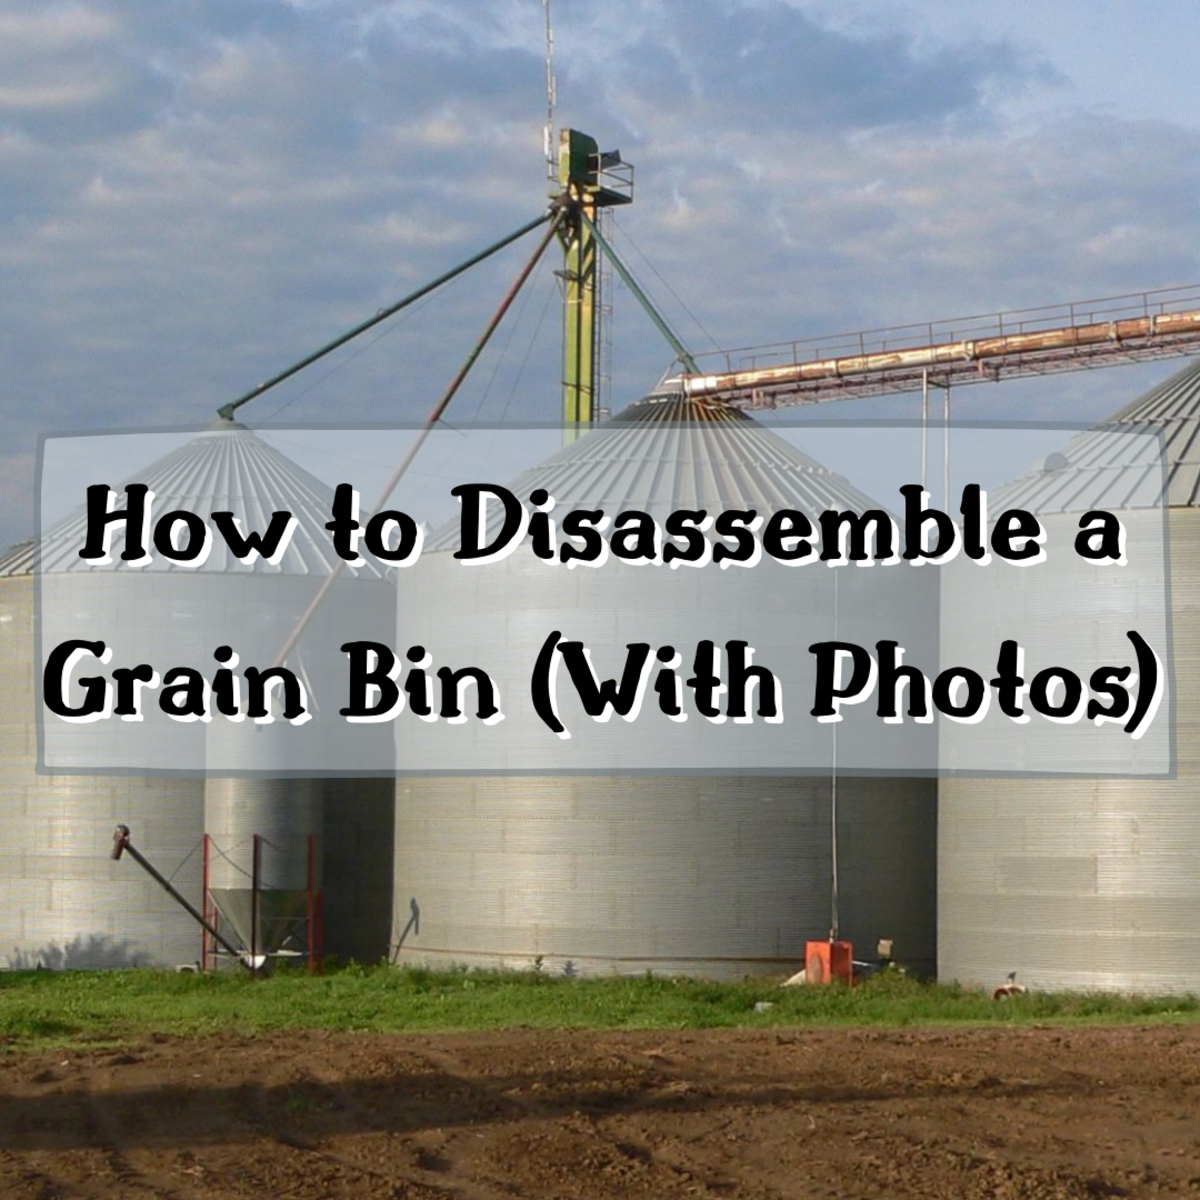 This article provides an explanation and picture tutorial for disassembling grain bins.